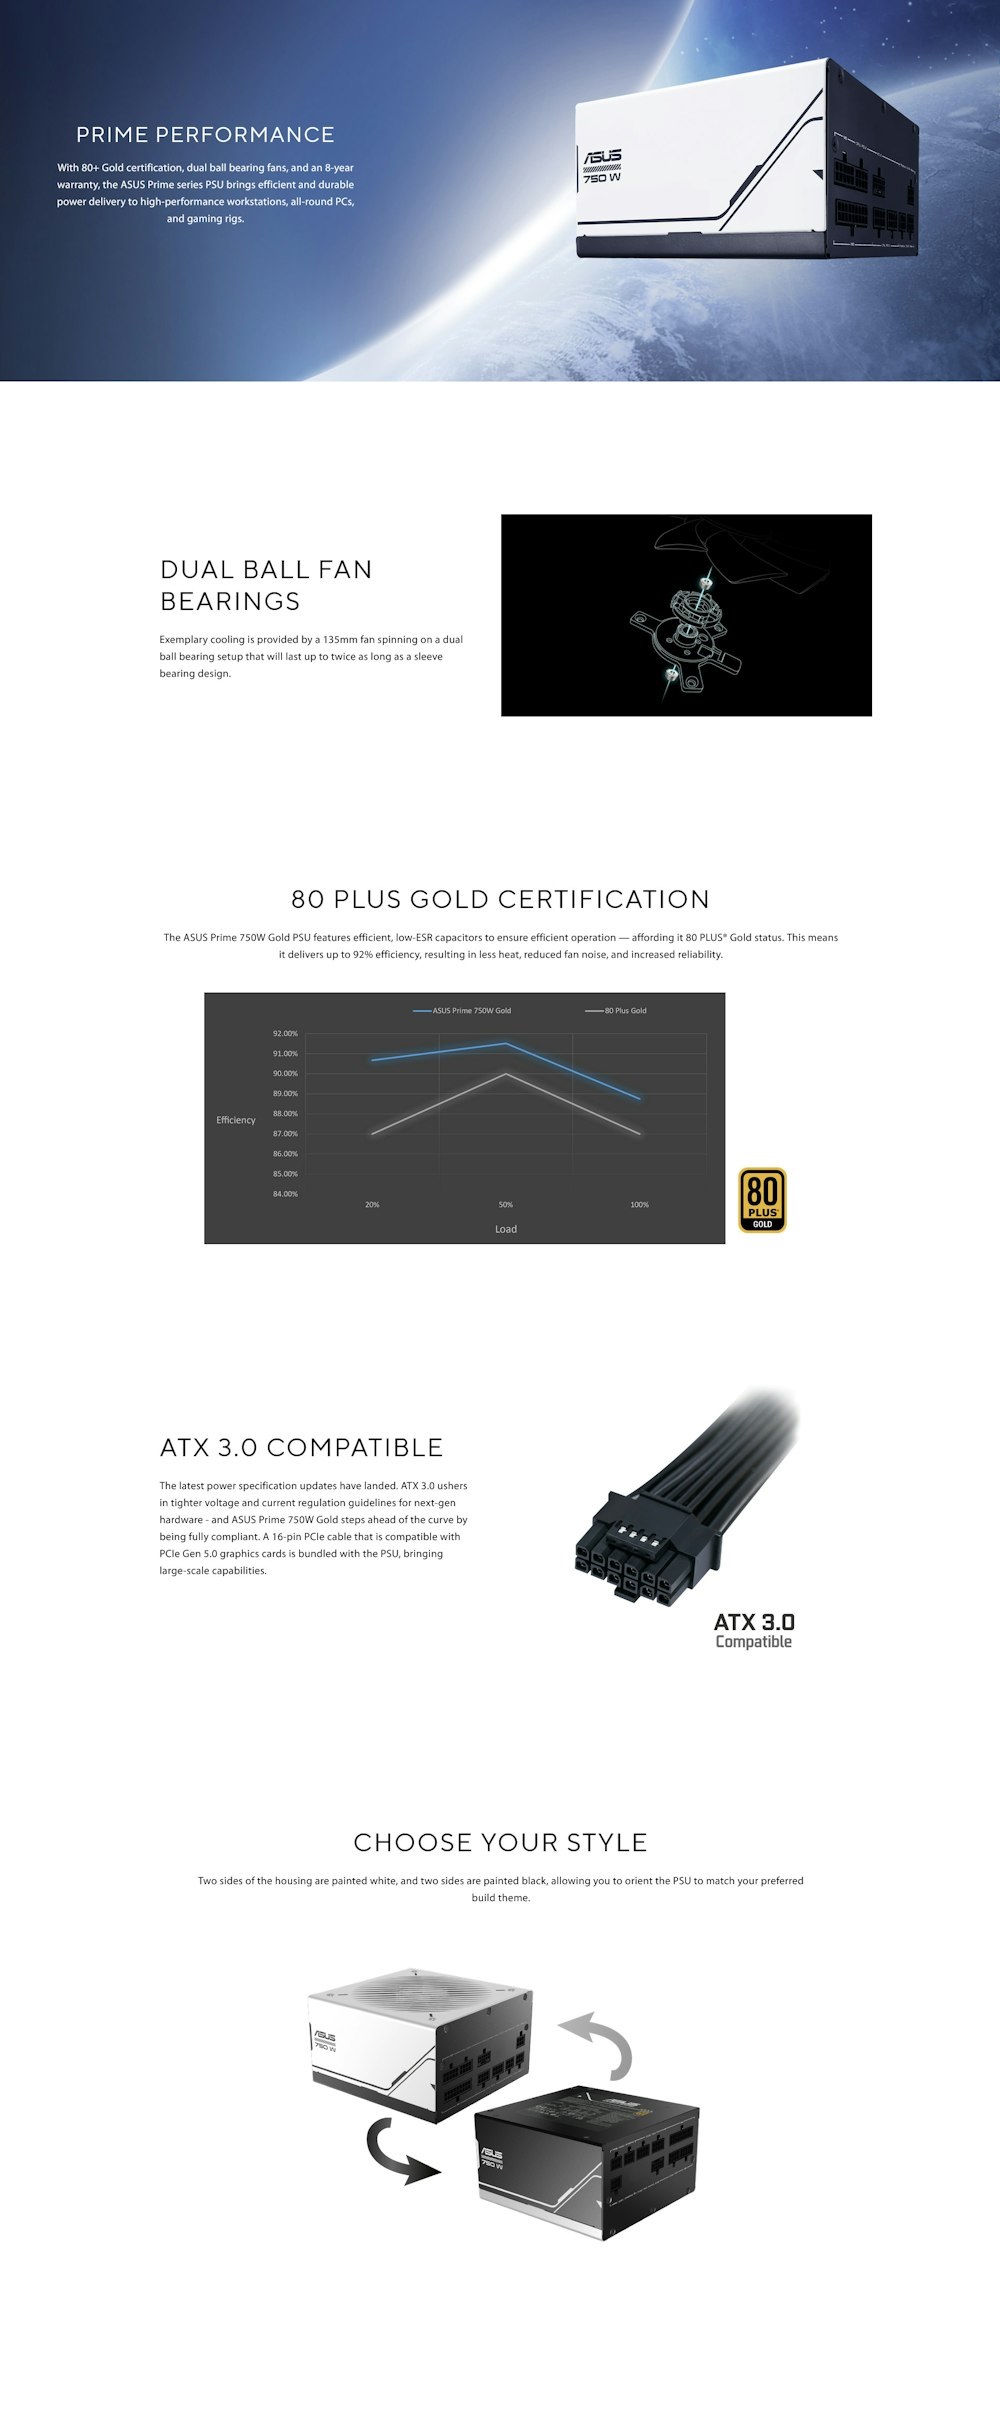 A large marketing image providing additional information about the product ASUS PRIME 750W Gold PCIe 5.0 ATX Modular PSU - Additional alt info not provided